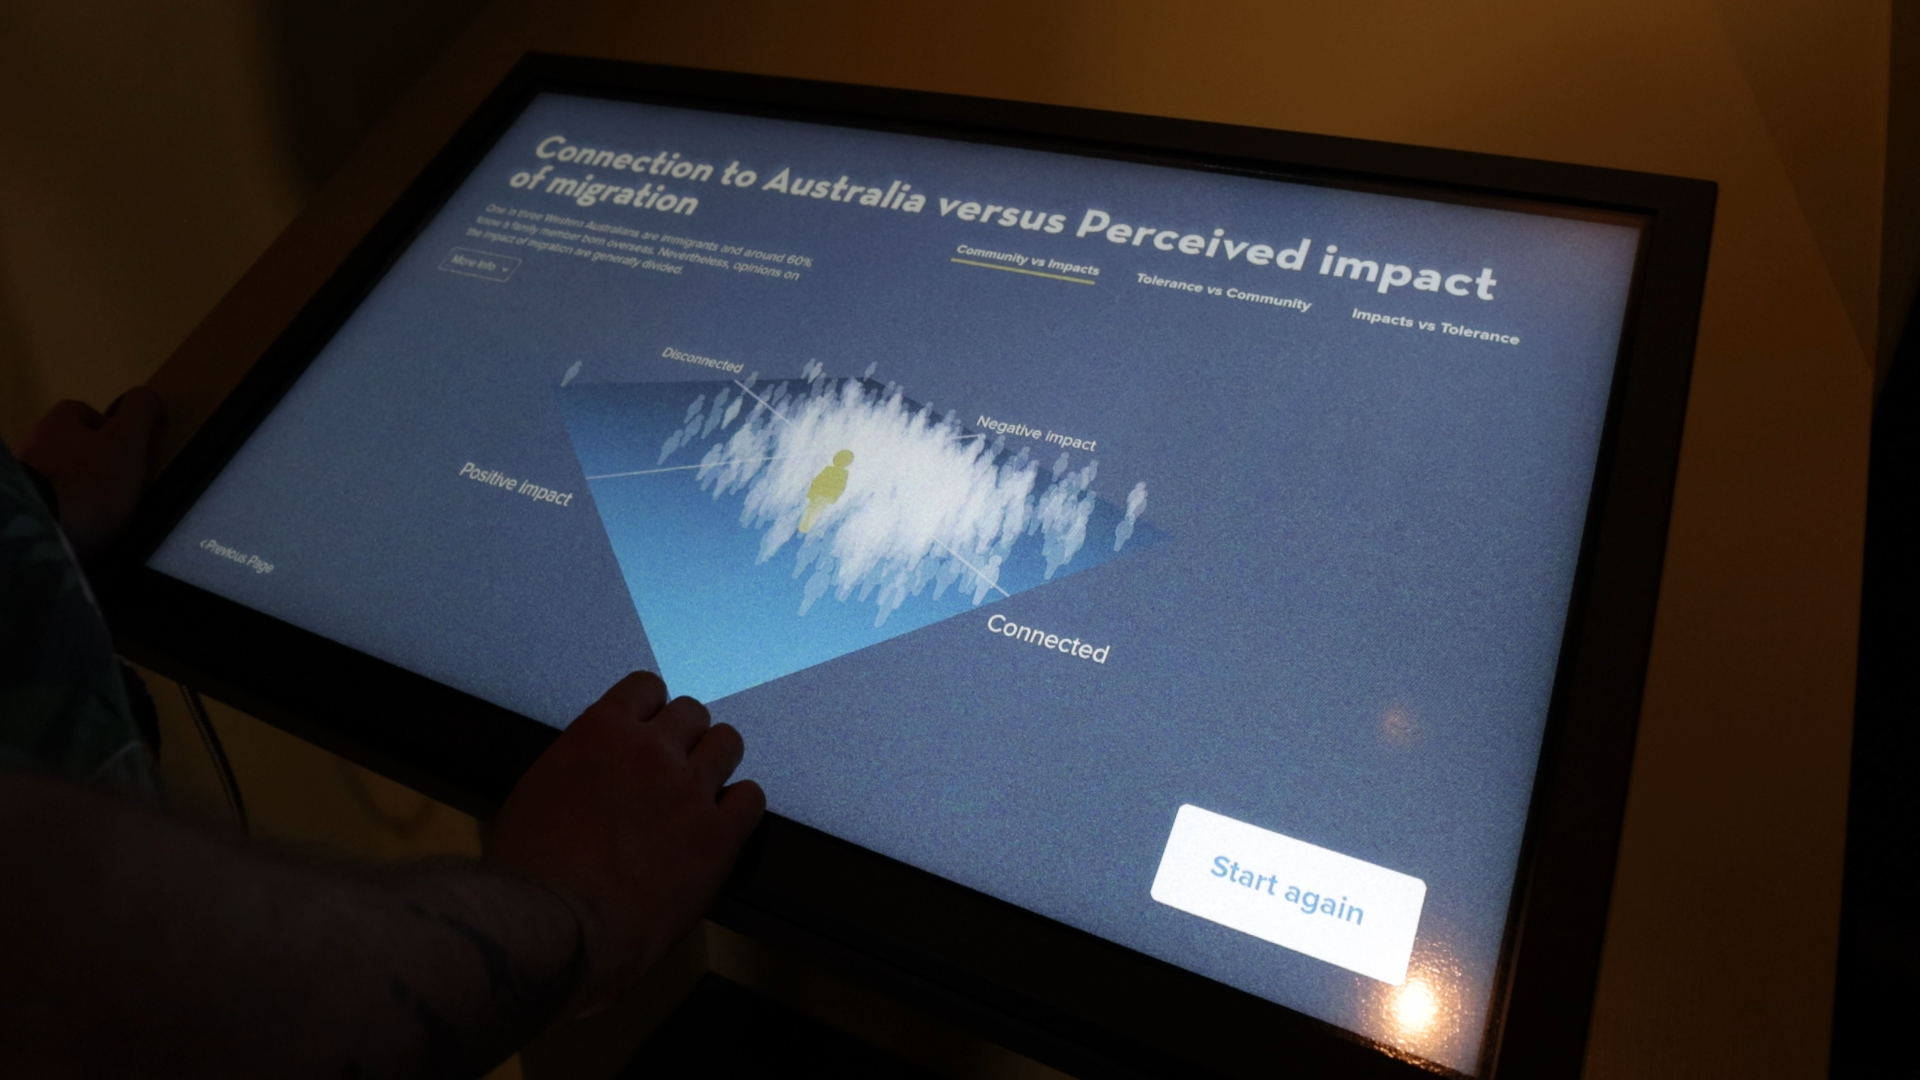 Migration and me Interactive